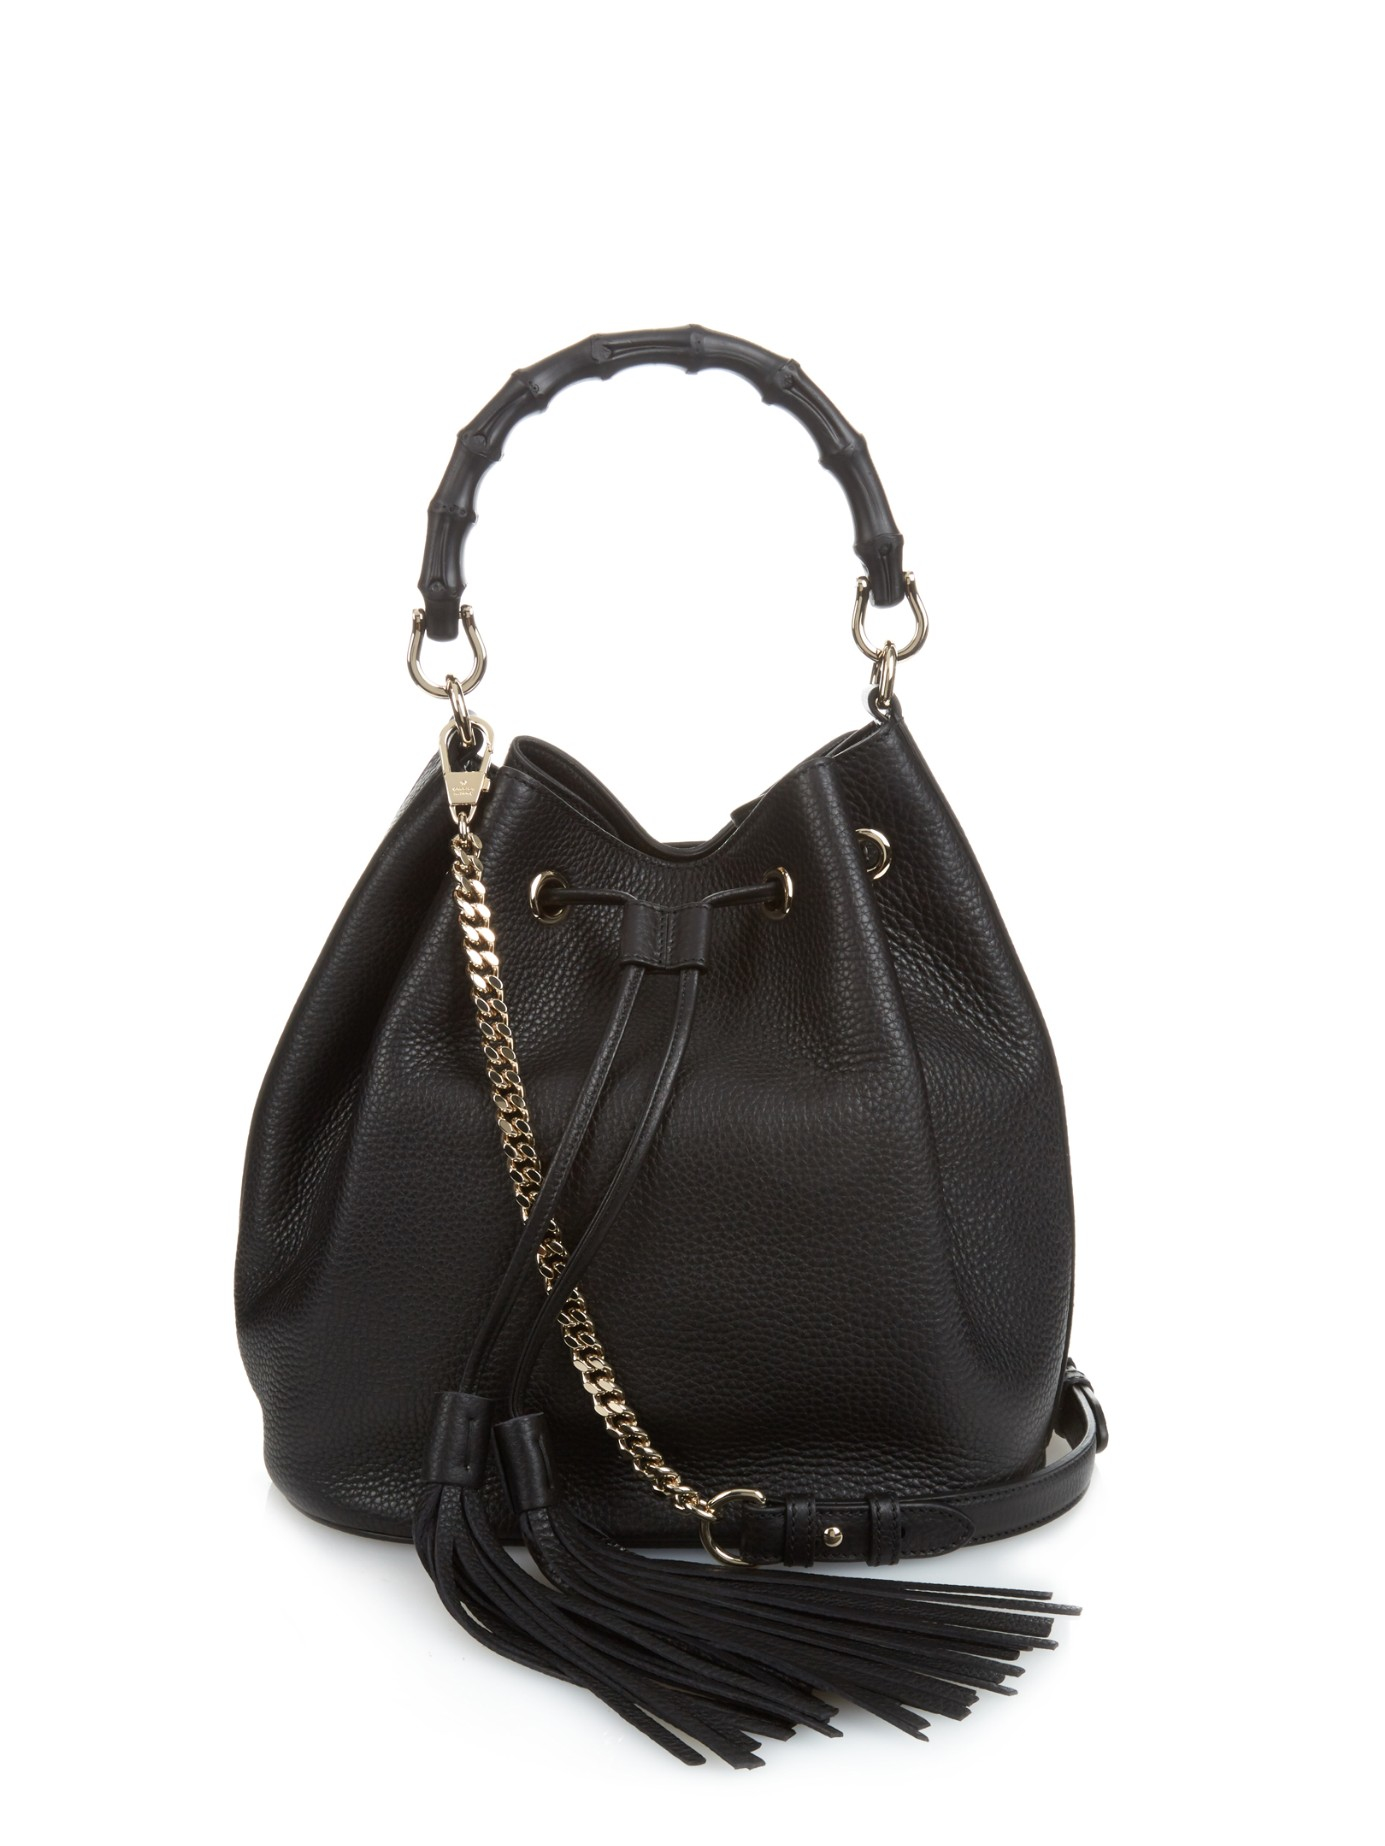 Gucci Bamboo Leather Bucket Bag in Black - Lyst